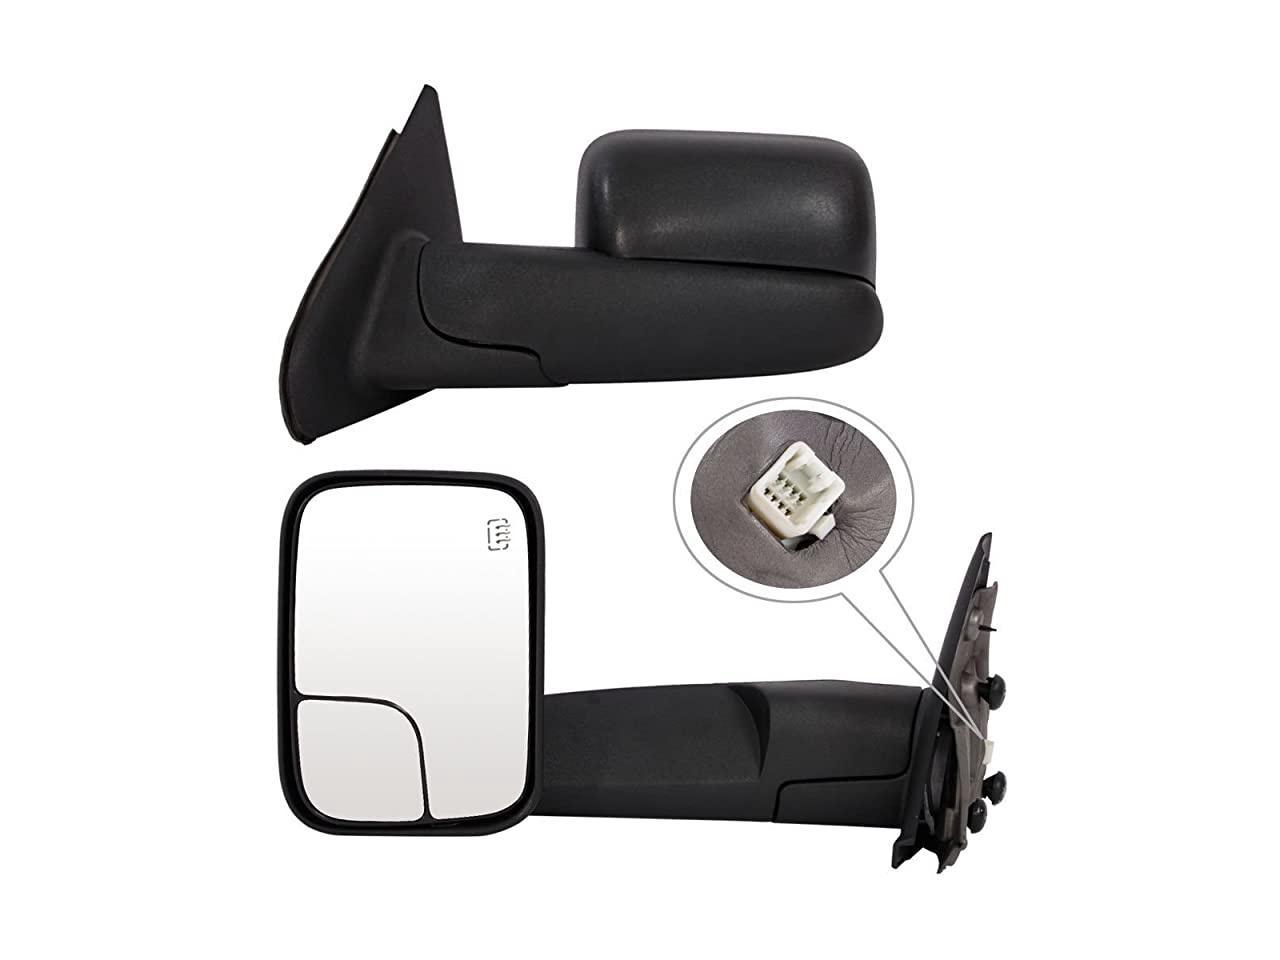 Mirrors Replacement for 2002-2008 Dodge Ram 1500 2003-2009 Dodge Ram 2500 3500 Pickup Truck 2008 Dodge Ram 1500 Side Mirror Replacement